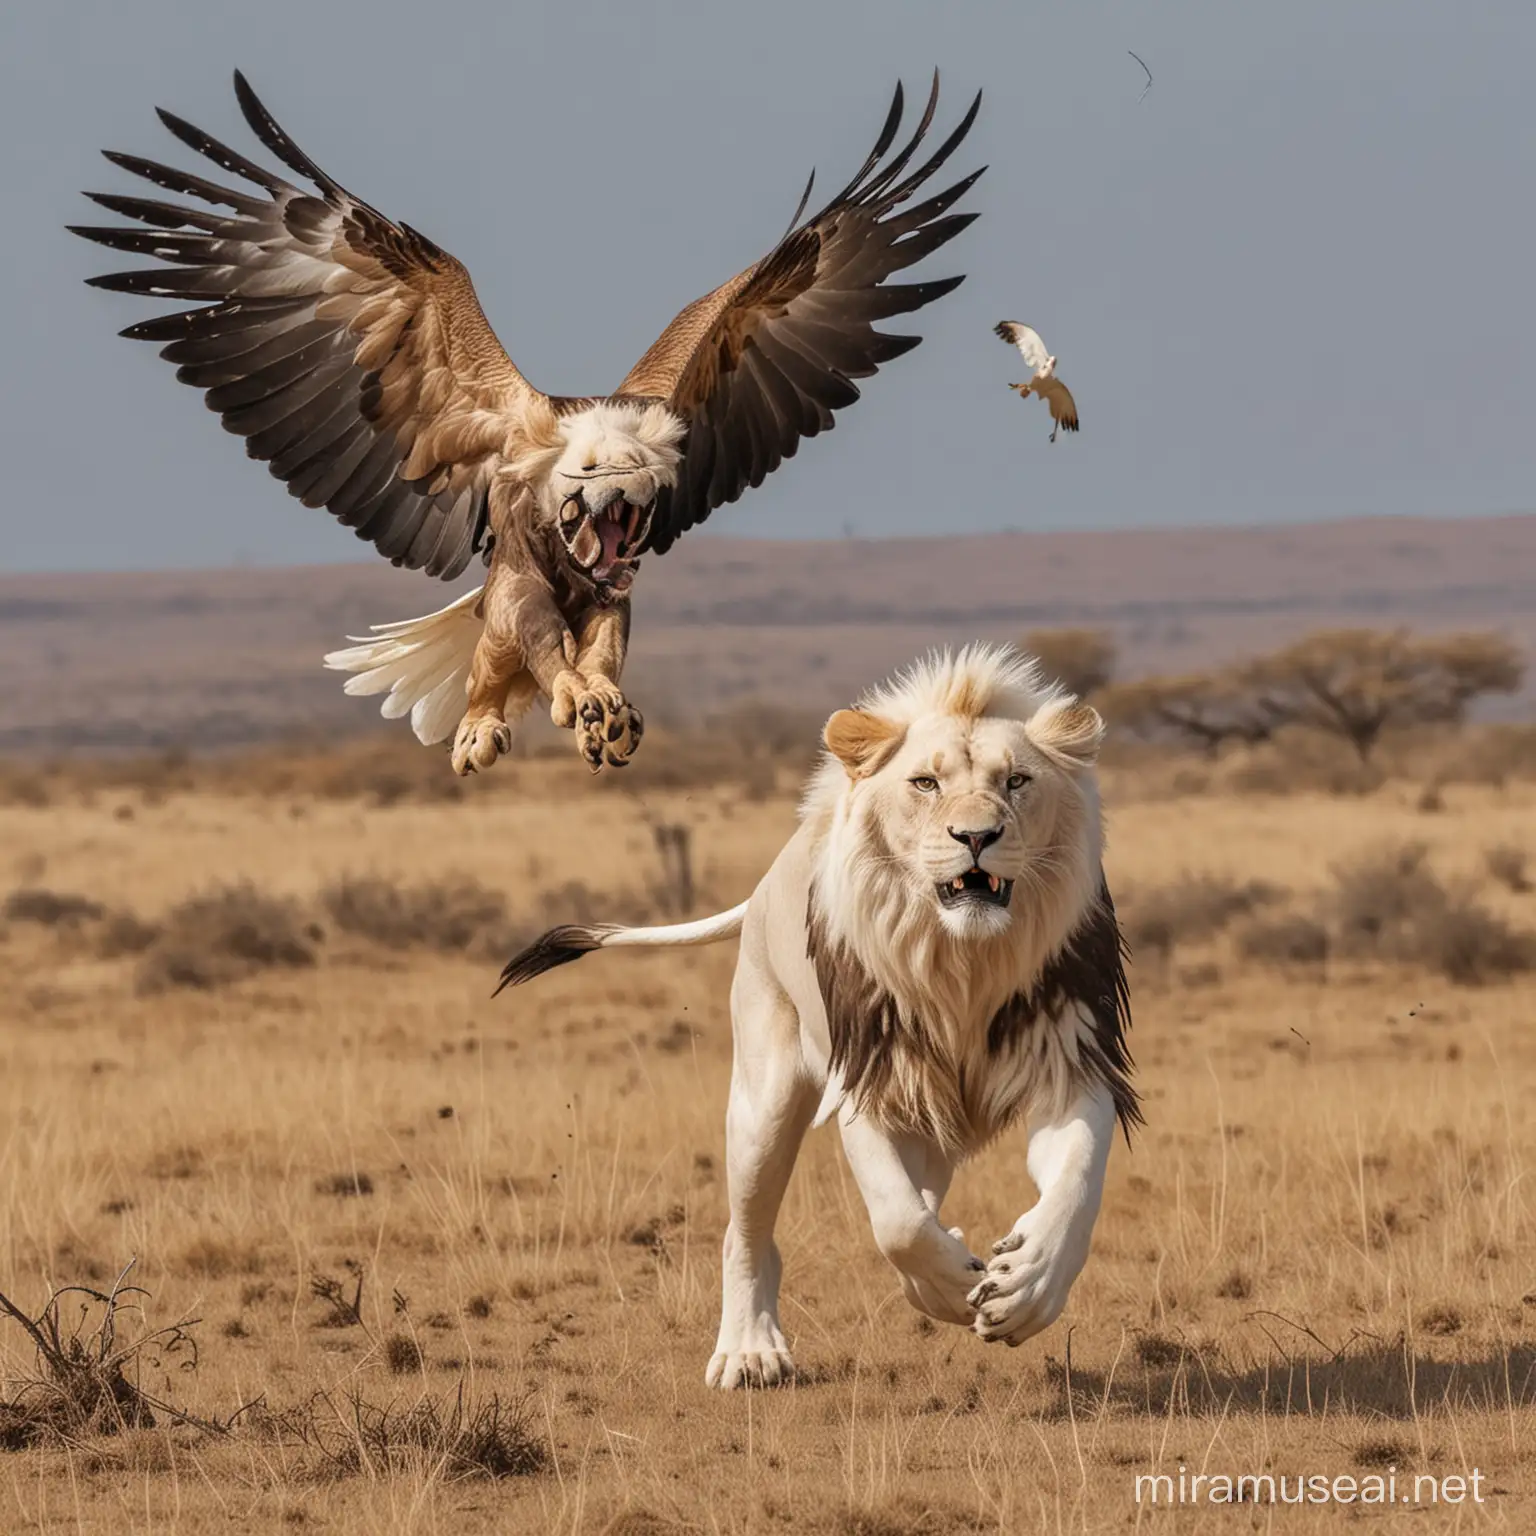 Eagle chasing one white lion. The lion is scared for it's life. The eagle is swooping in from the sky